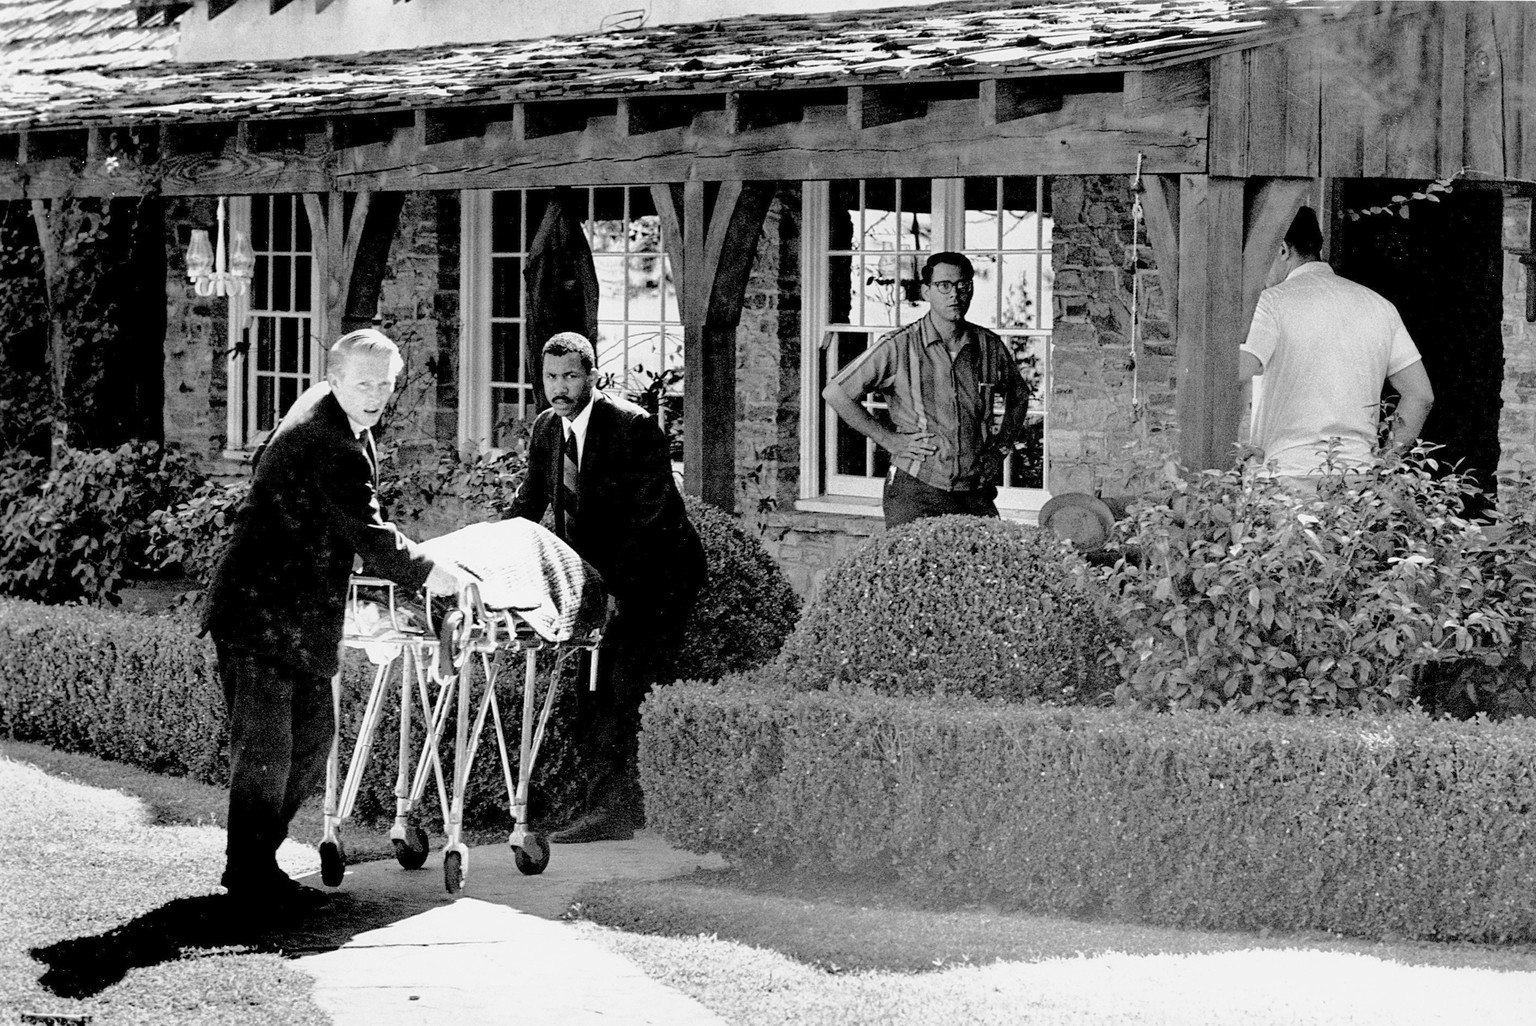 FILE - This Aug. 9, 1969 file photo shows the body of actress Sharon Tate being taken from her rented house on Cielo Drive in the Bel Air Estates area of Los Angeles. Cult leader Charles Manson, who d ...